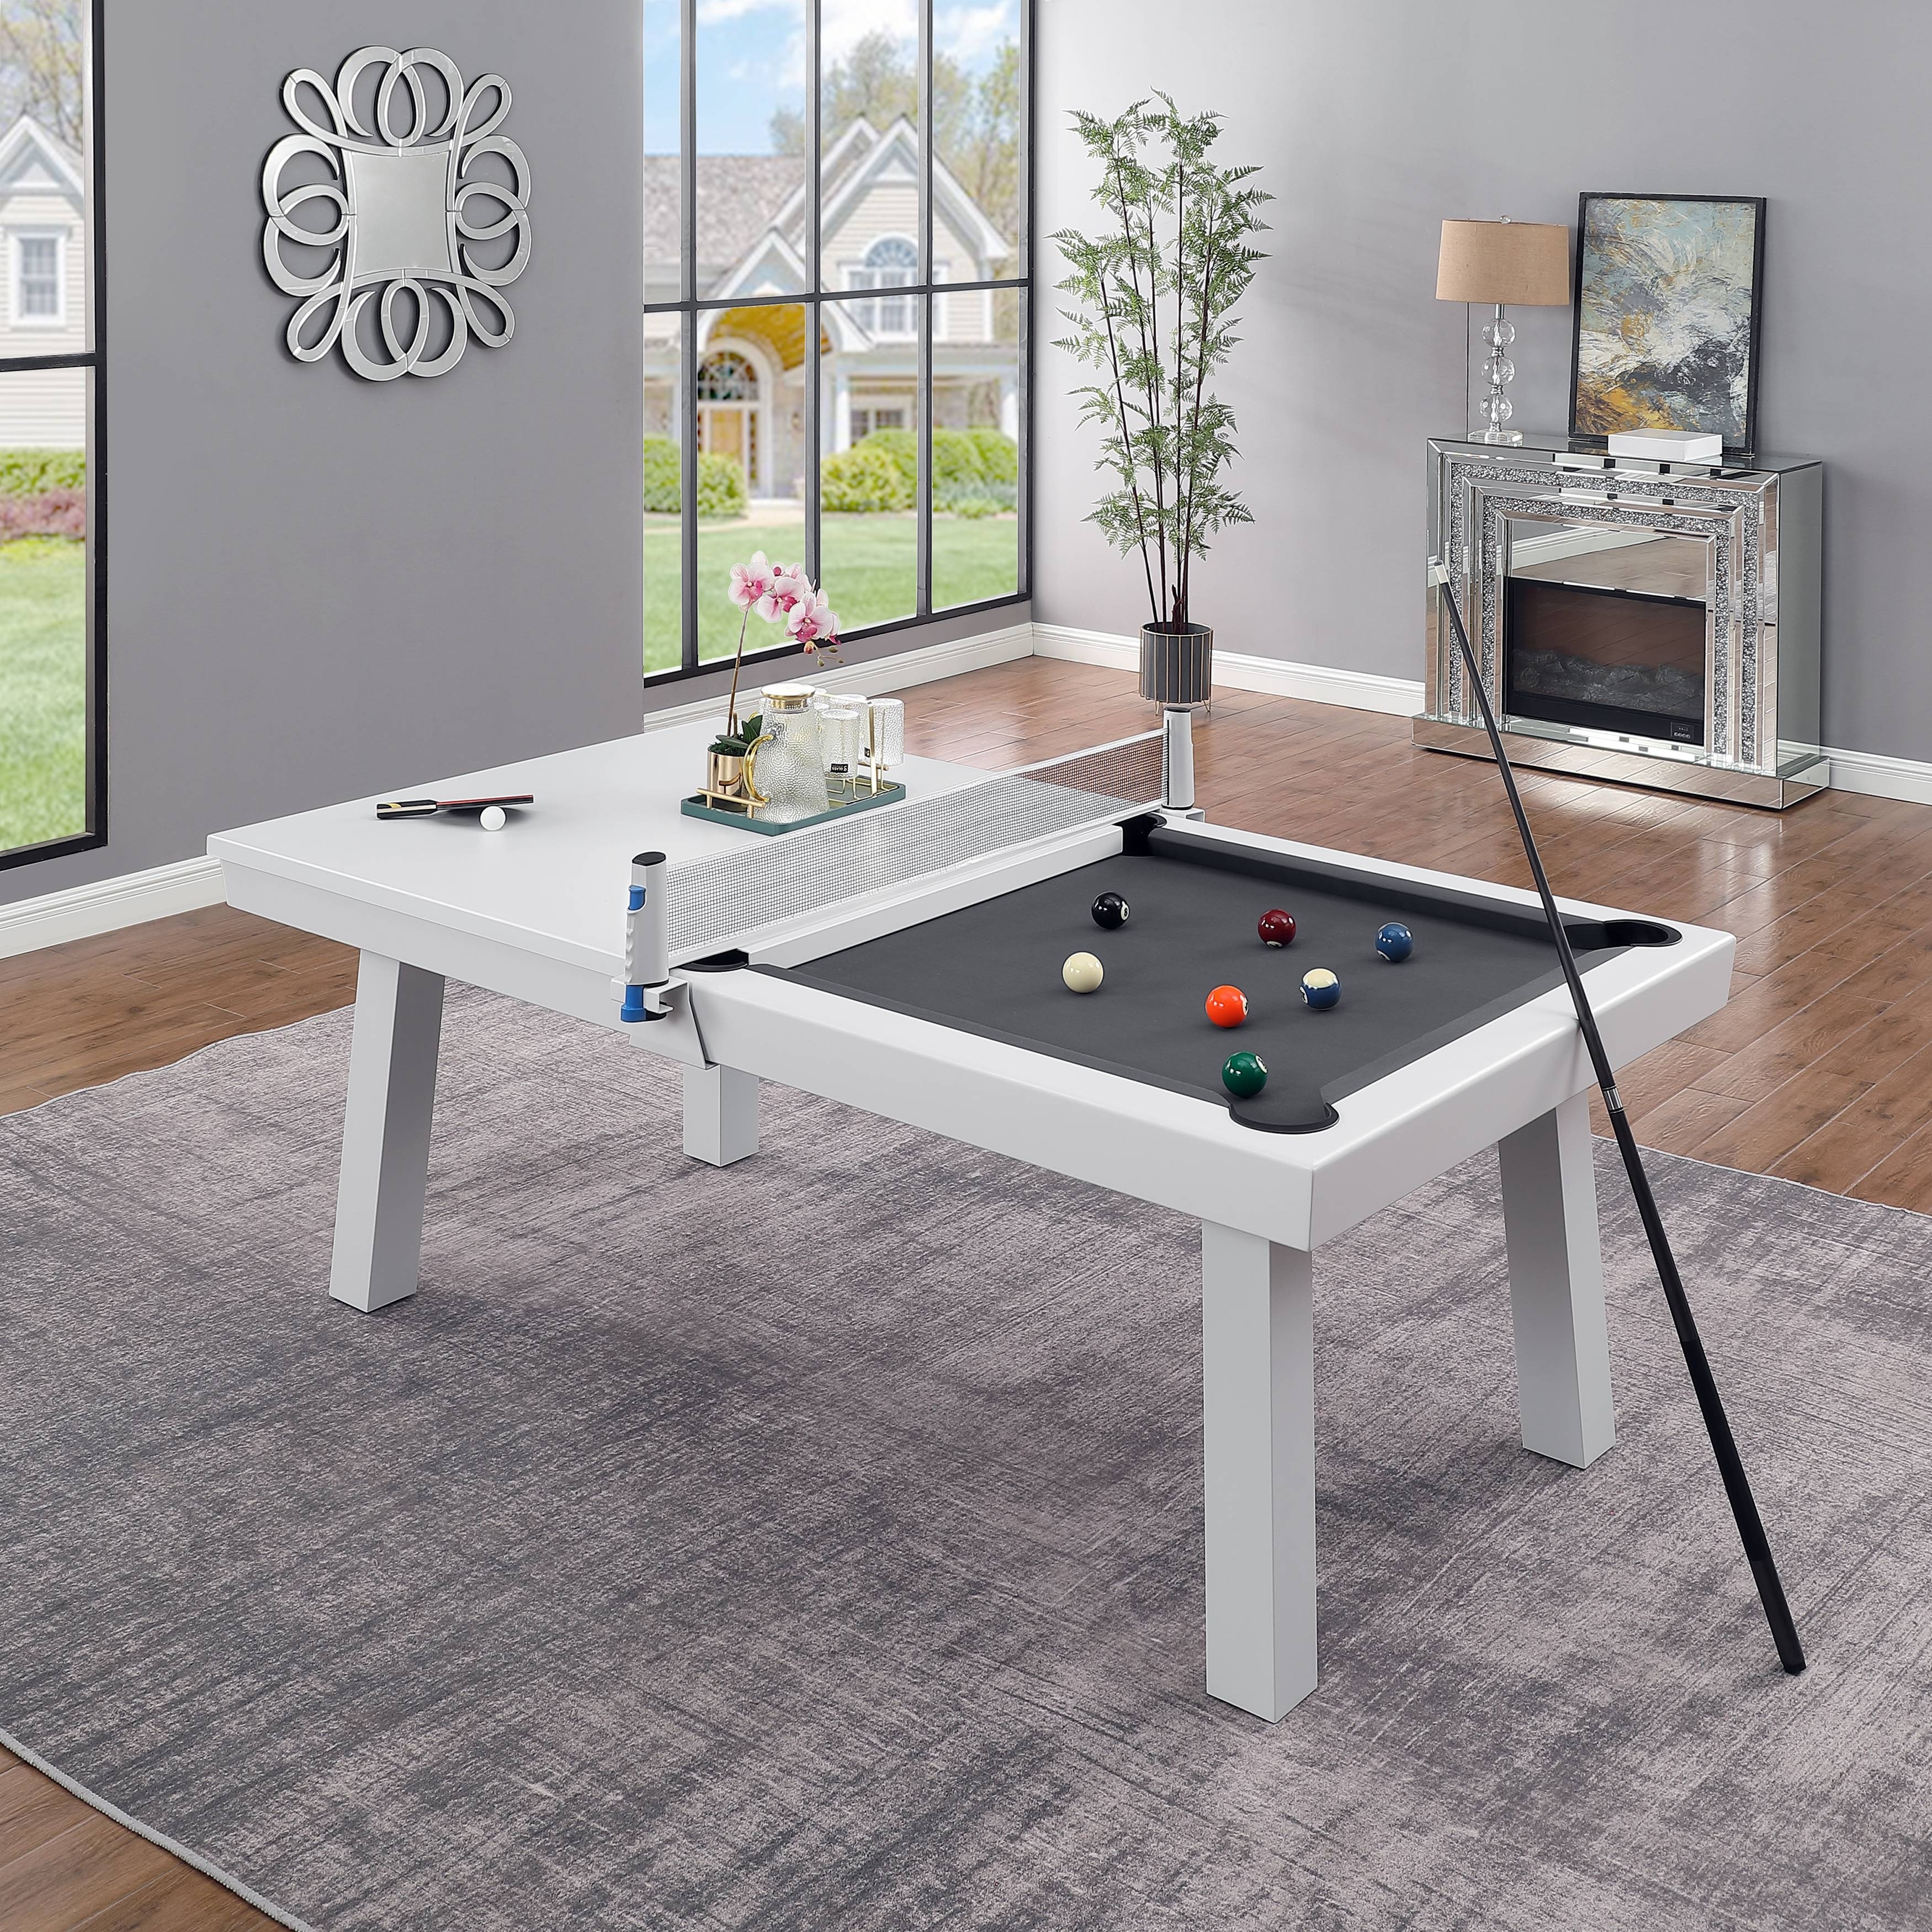 7 Foot Pool Table Dining Table